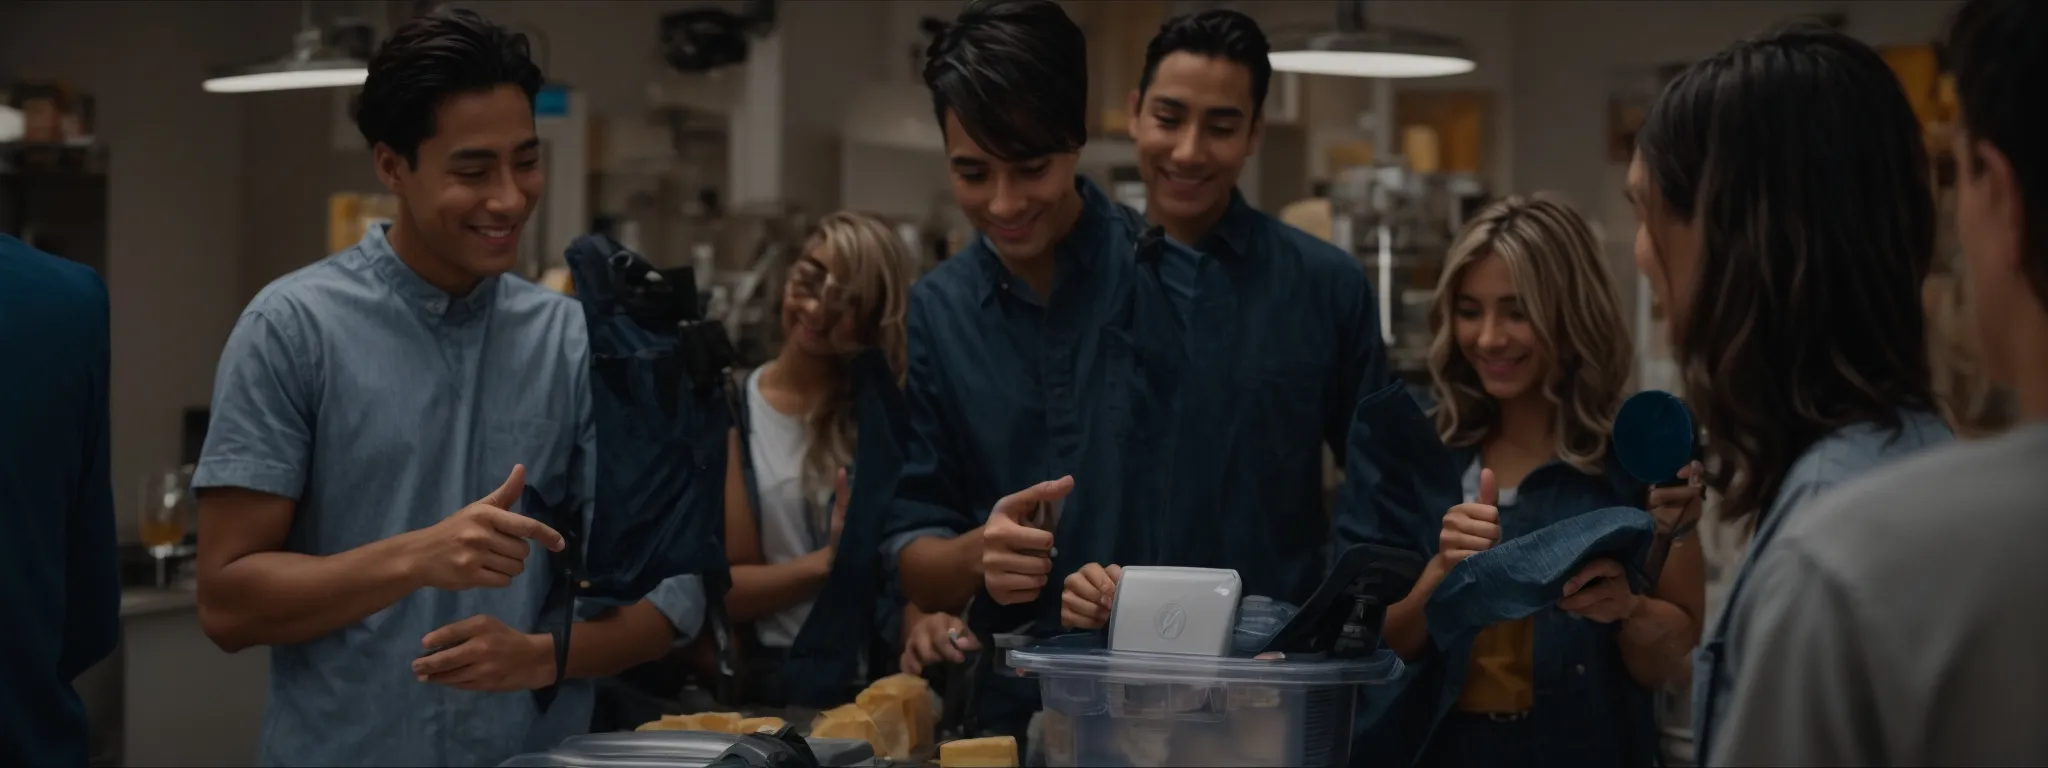 a group of smiling people examining a product while one shows a thumbs-up gesture.